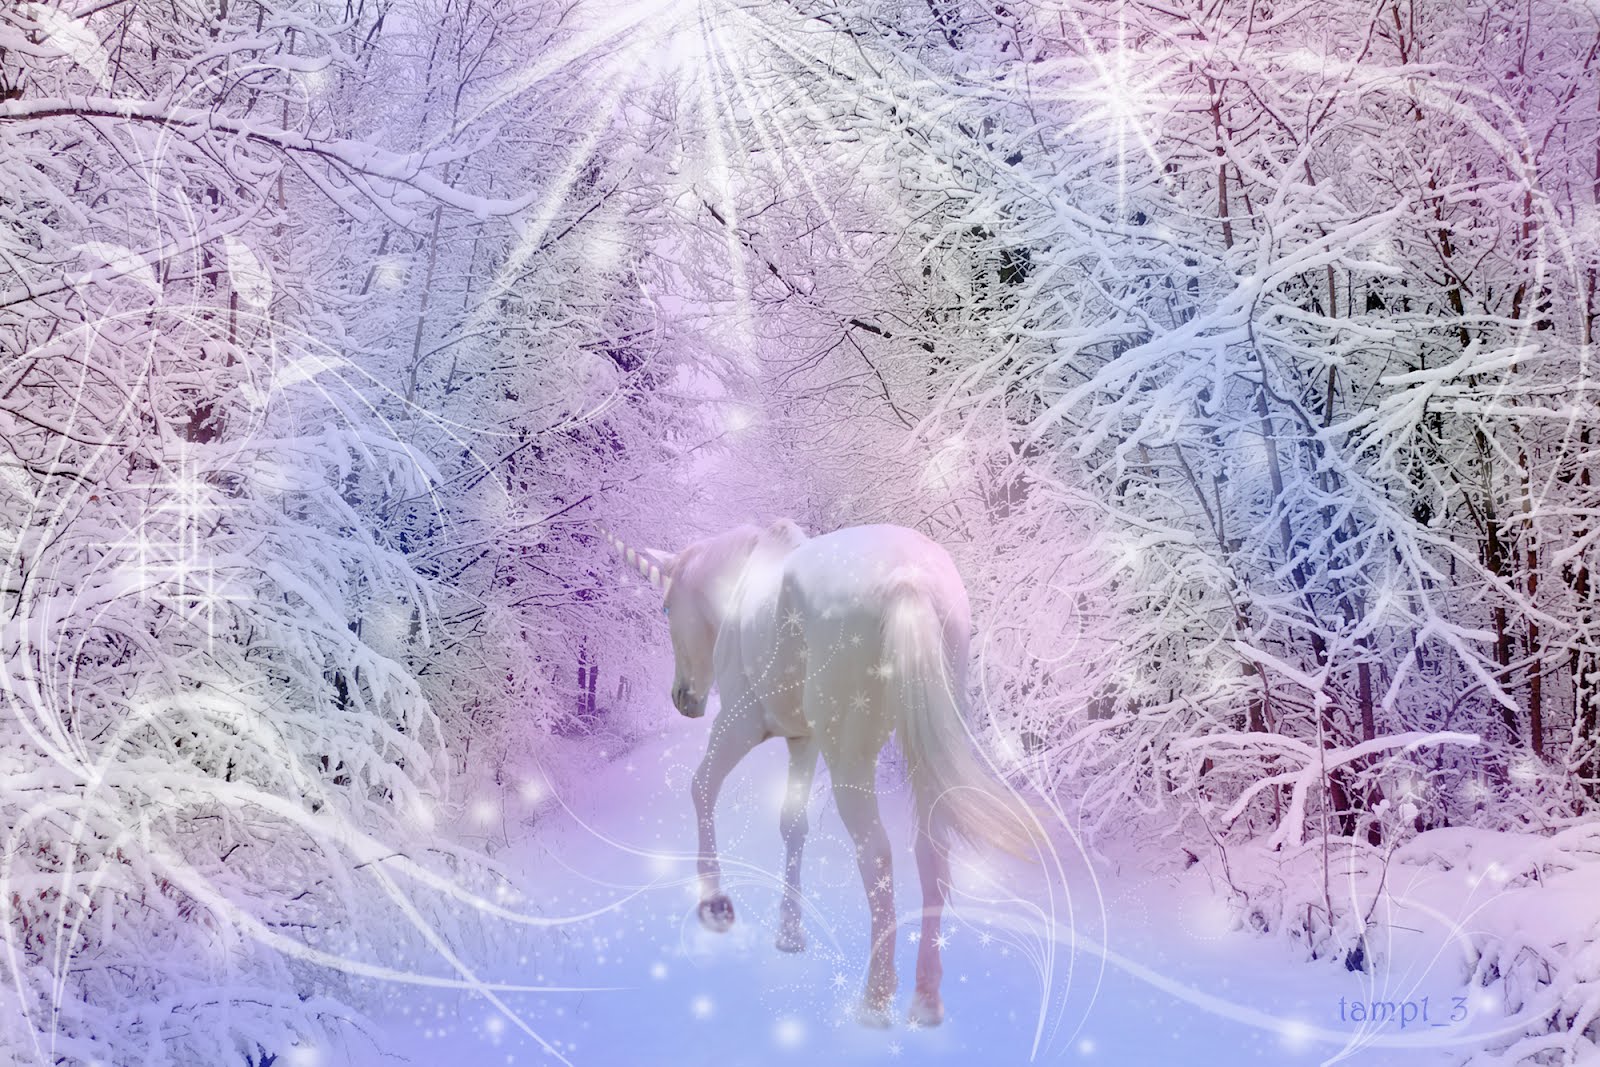 Star Steeds and Other Dreams: UNICORN IN THE SNOW